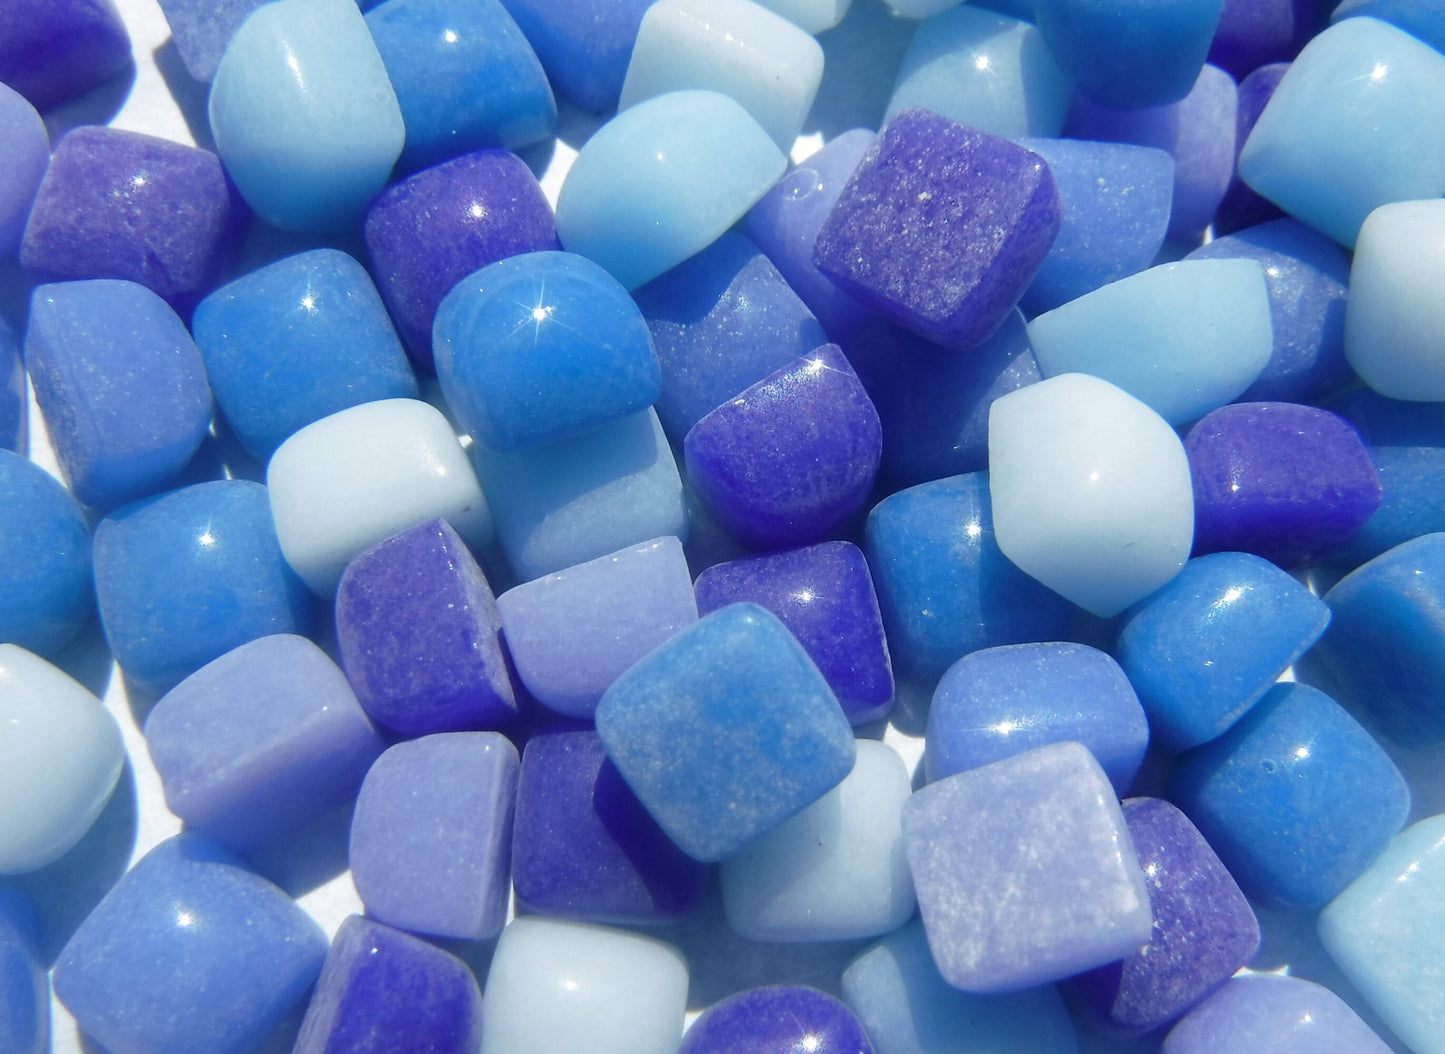 Out of the Blue Mix TINY Glass Tiles - 6mm Mini Mosaic Tiles - 100 Square with Domed Top - Use for Mosaic Jewelry Crystal